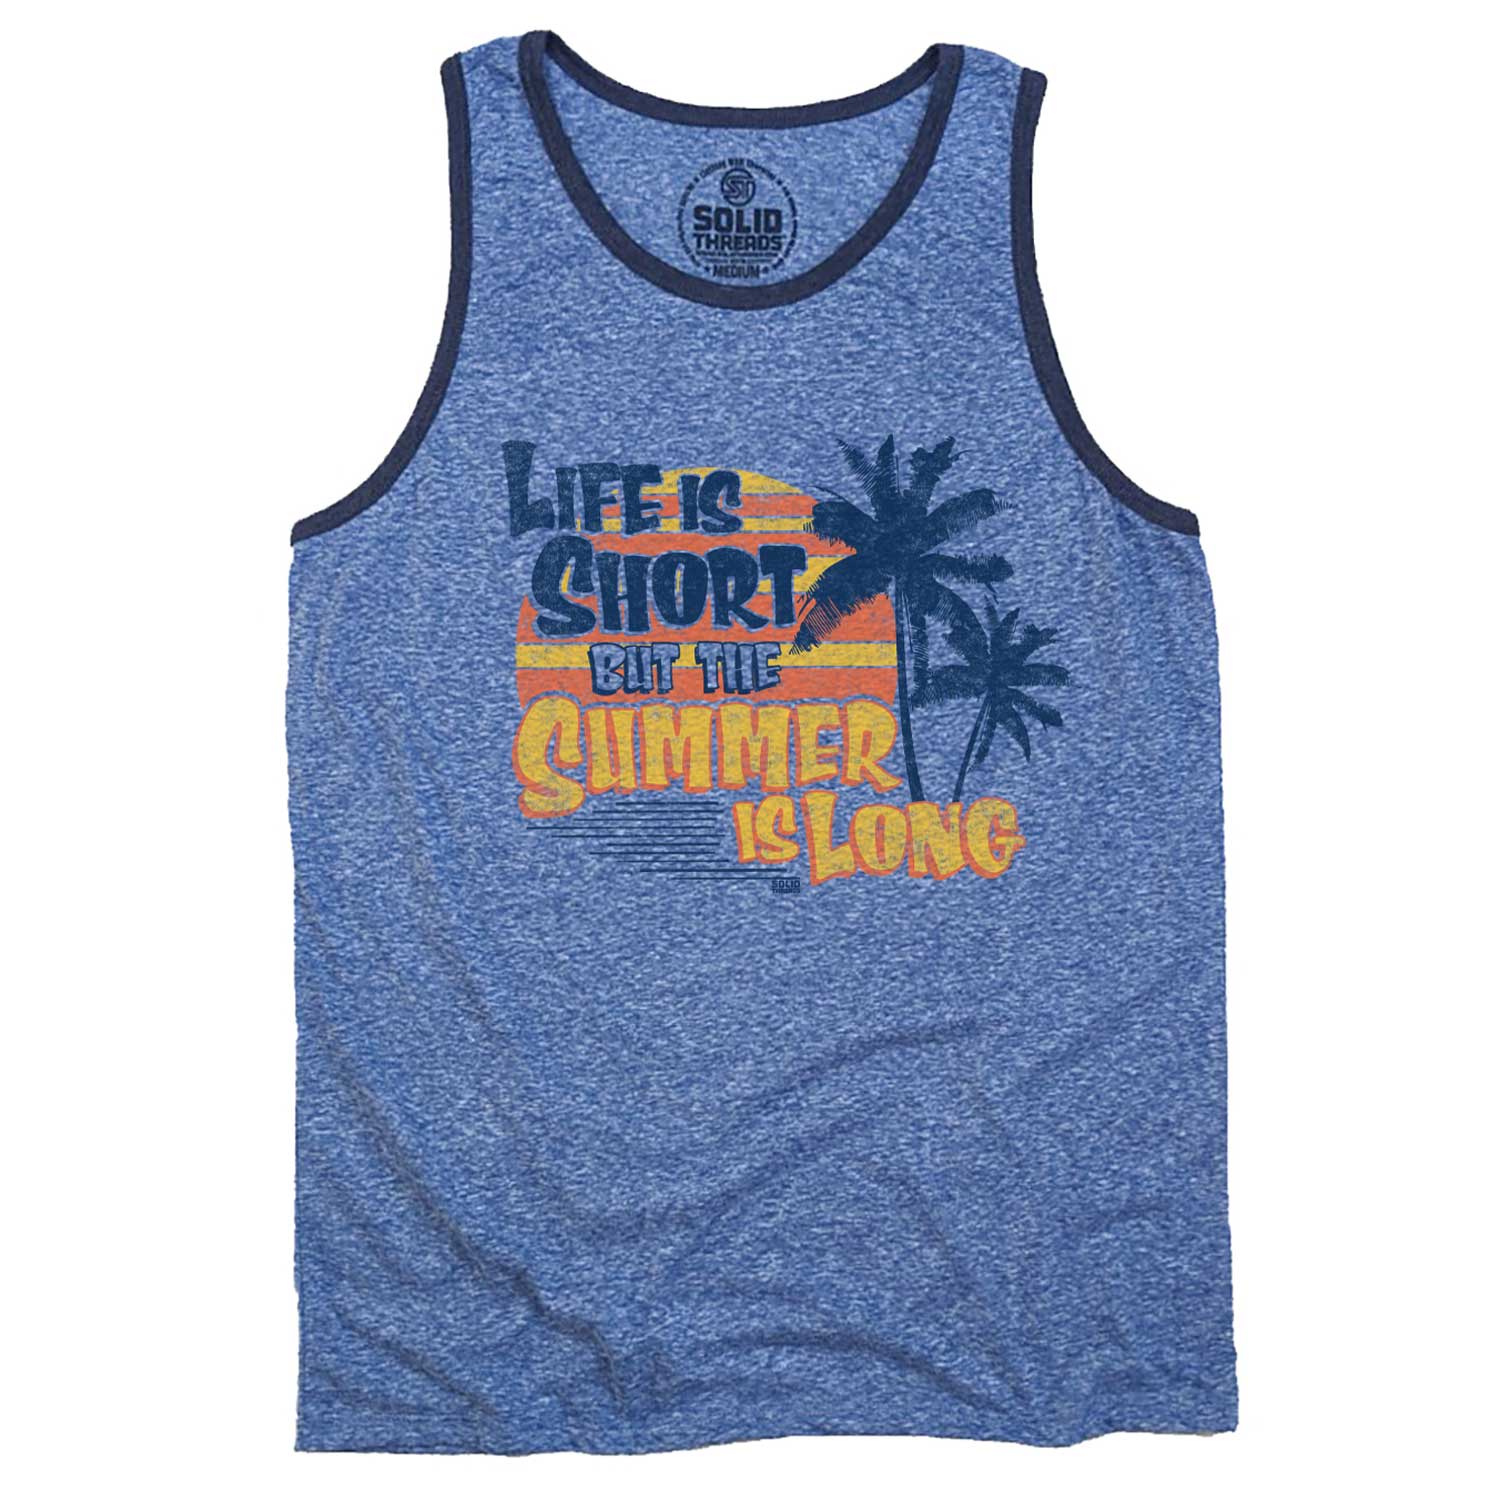 Men's Life is Short But the Summer is Long Graphic Tank Top | Retro Sleeveless Shirt | Solid Threads